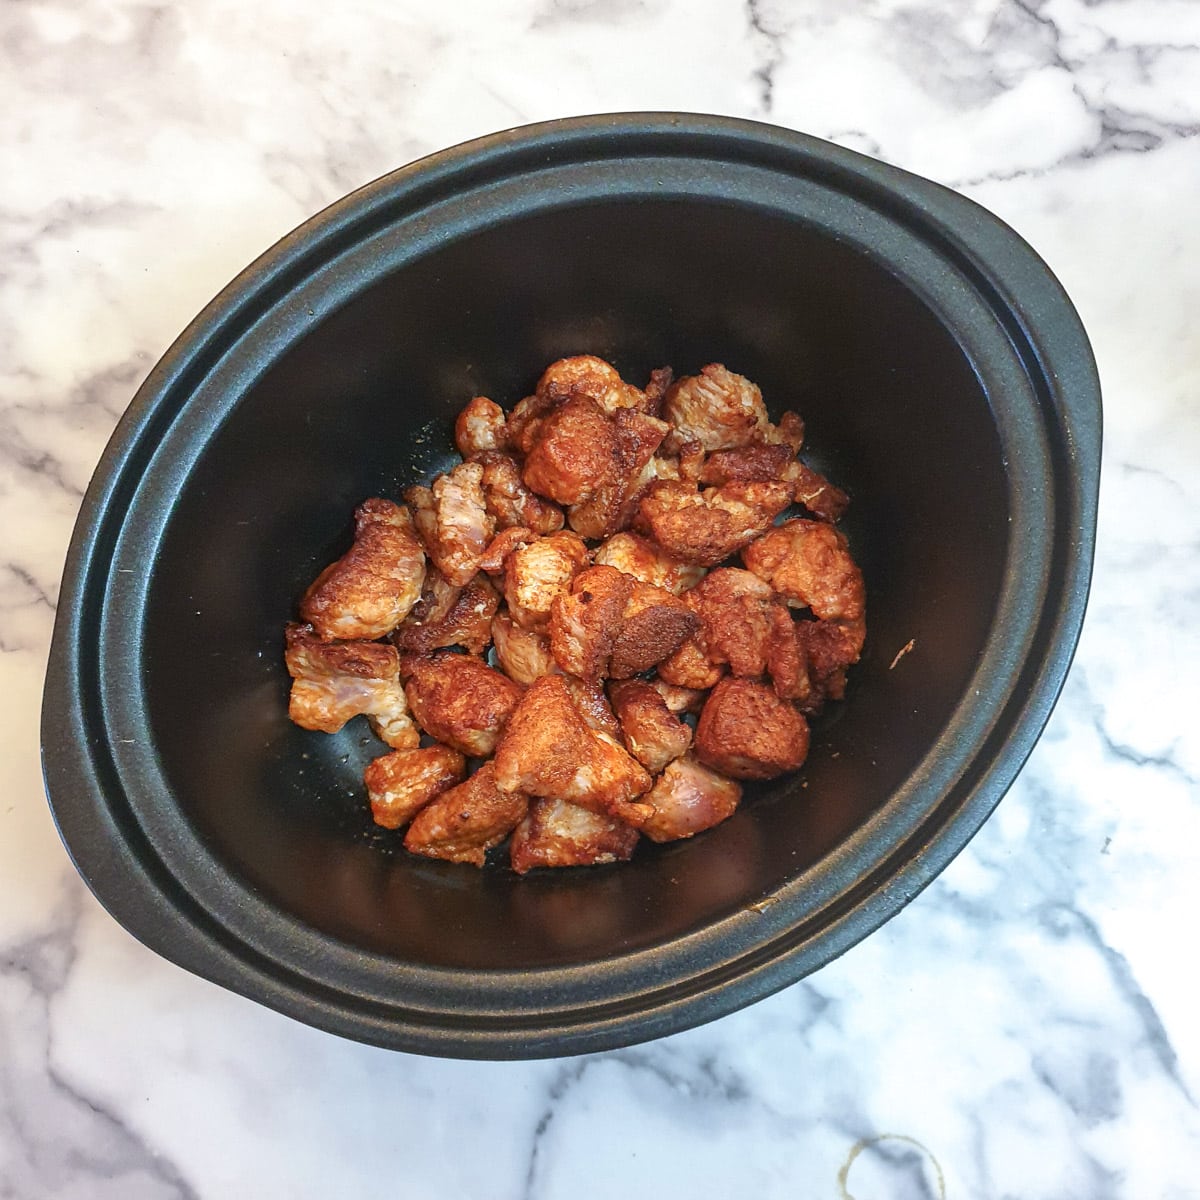 Browned pork in a slow-cooker.